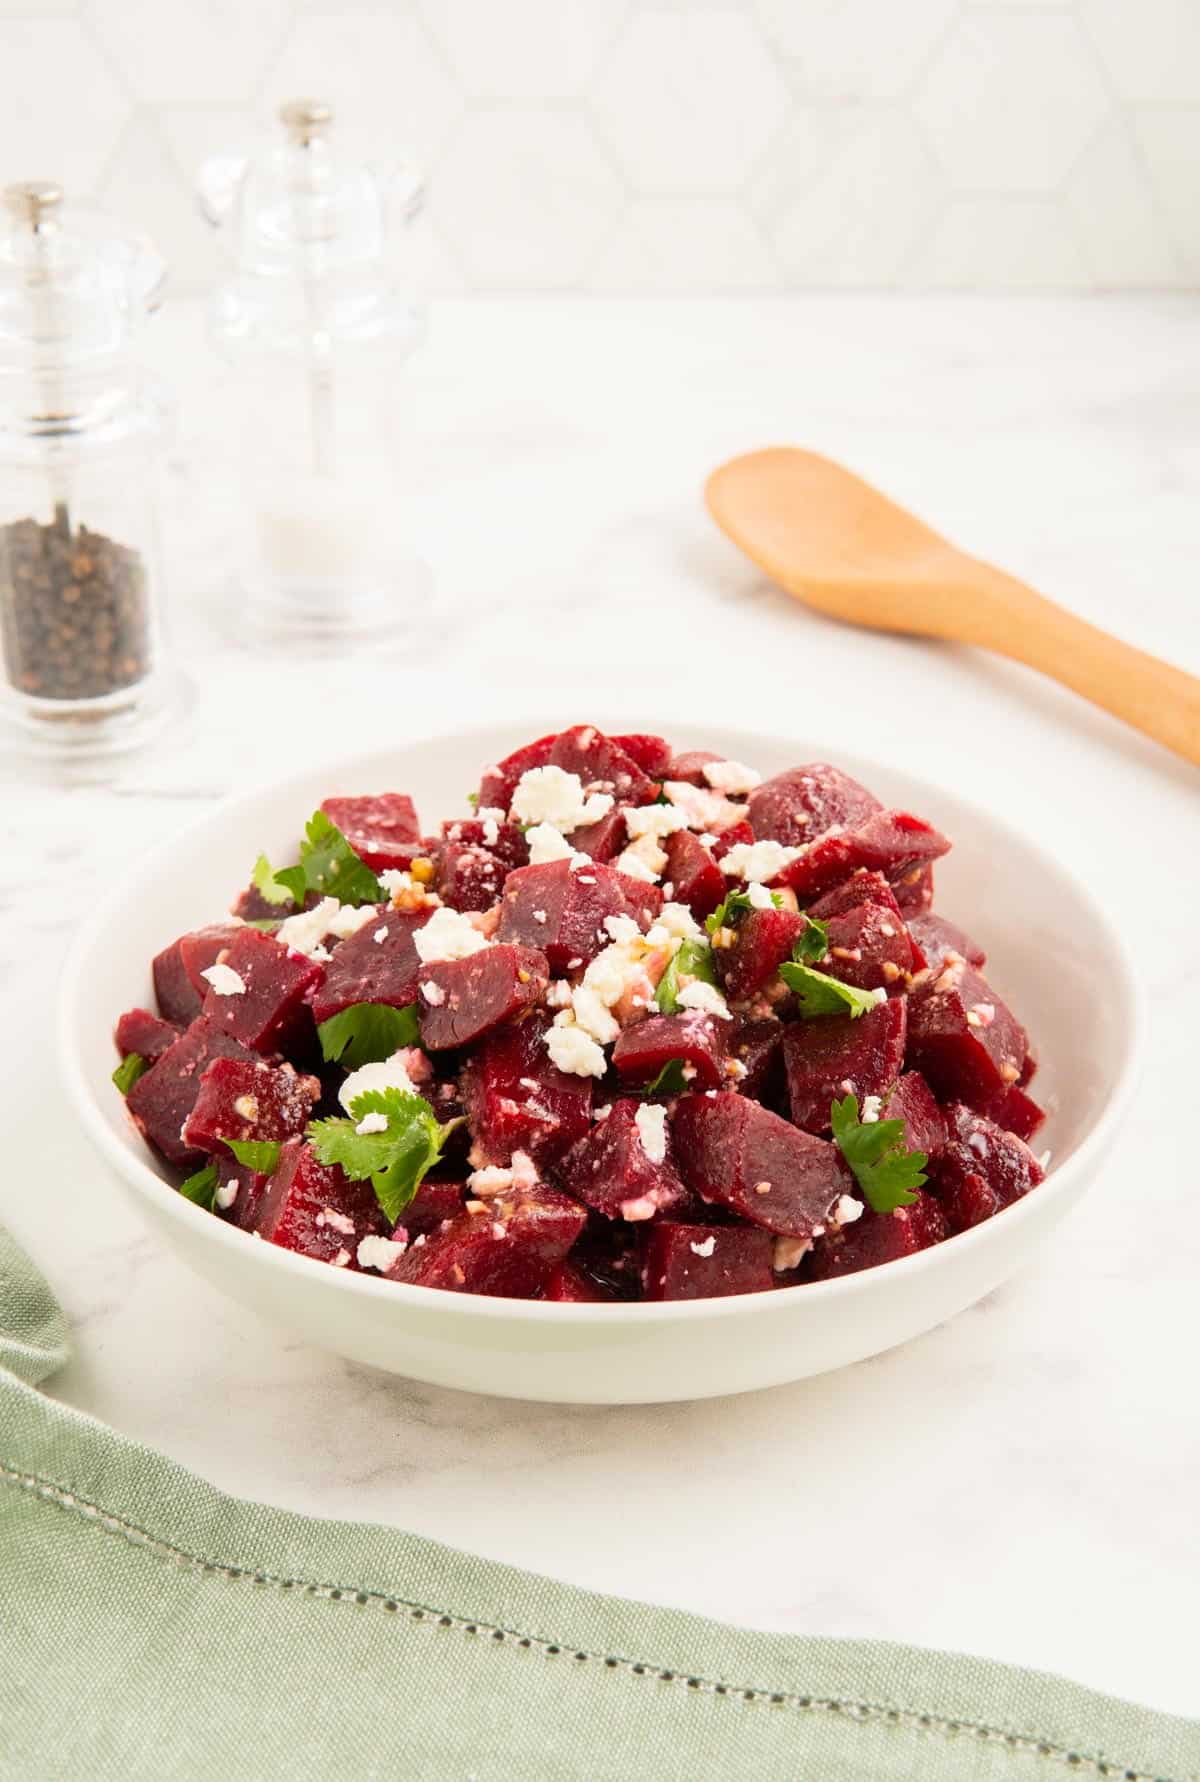 Beetroot and feta salad in a white bowl with a green napkin.